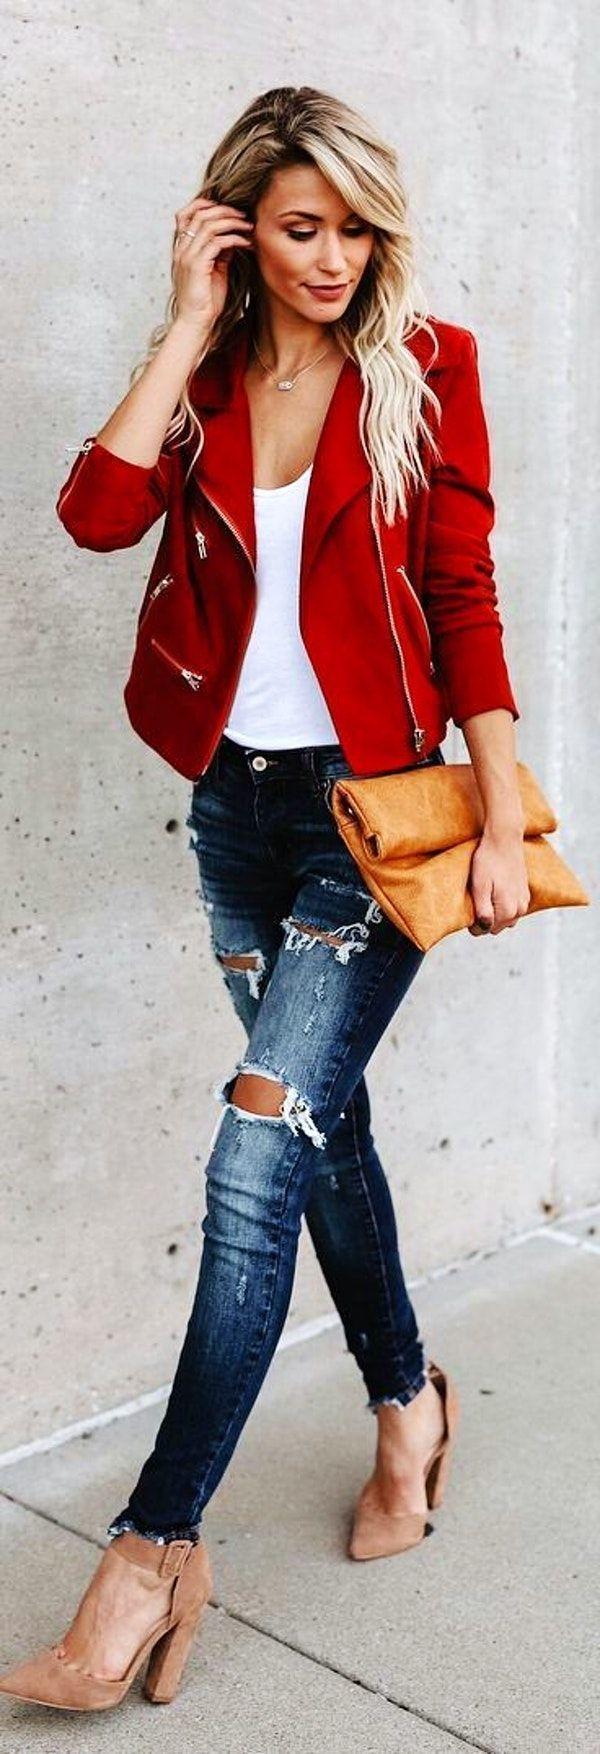 Wedding - #winter #outfits Red Zip-up Coat And Distressed Blue Fitted Jeans #winteroutfits #fitnessoutfits #fashionjewelry 